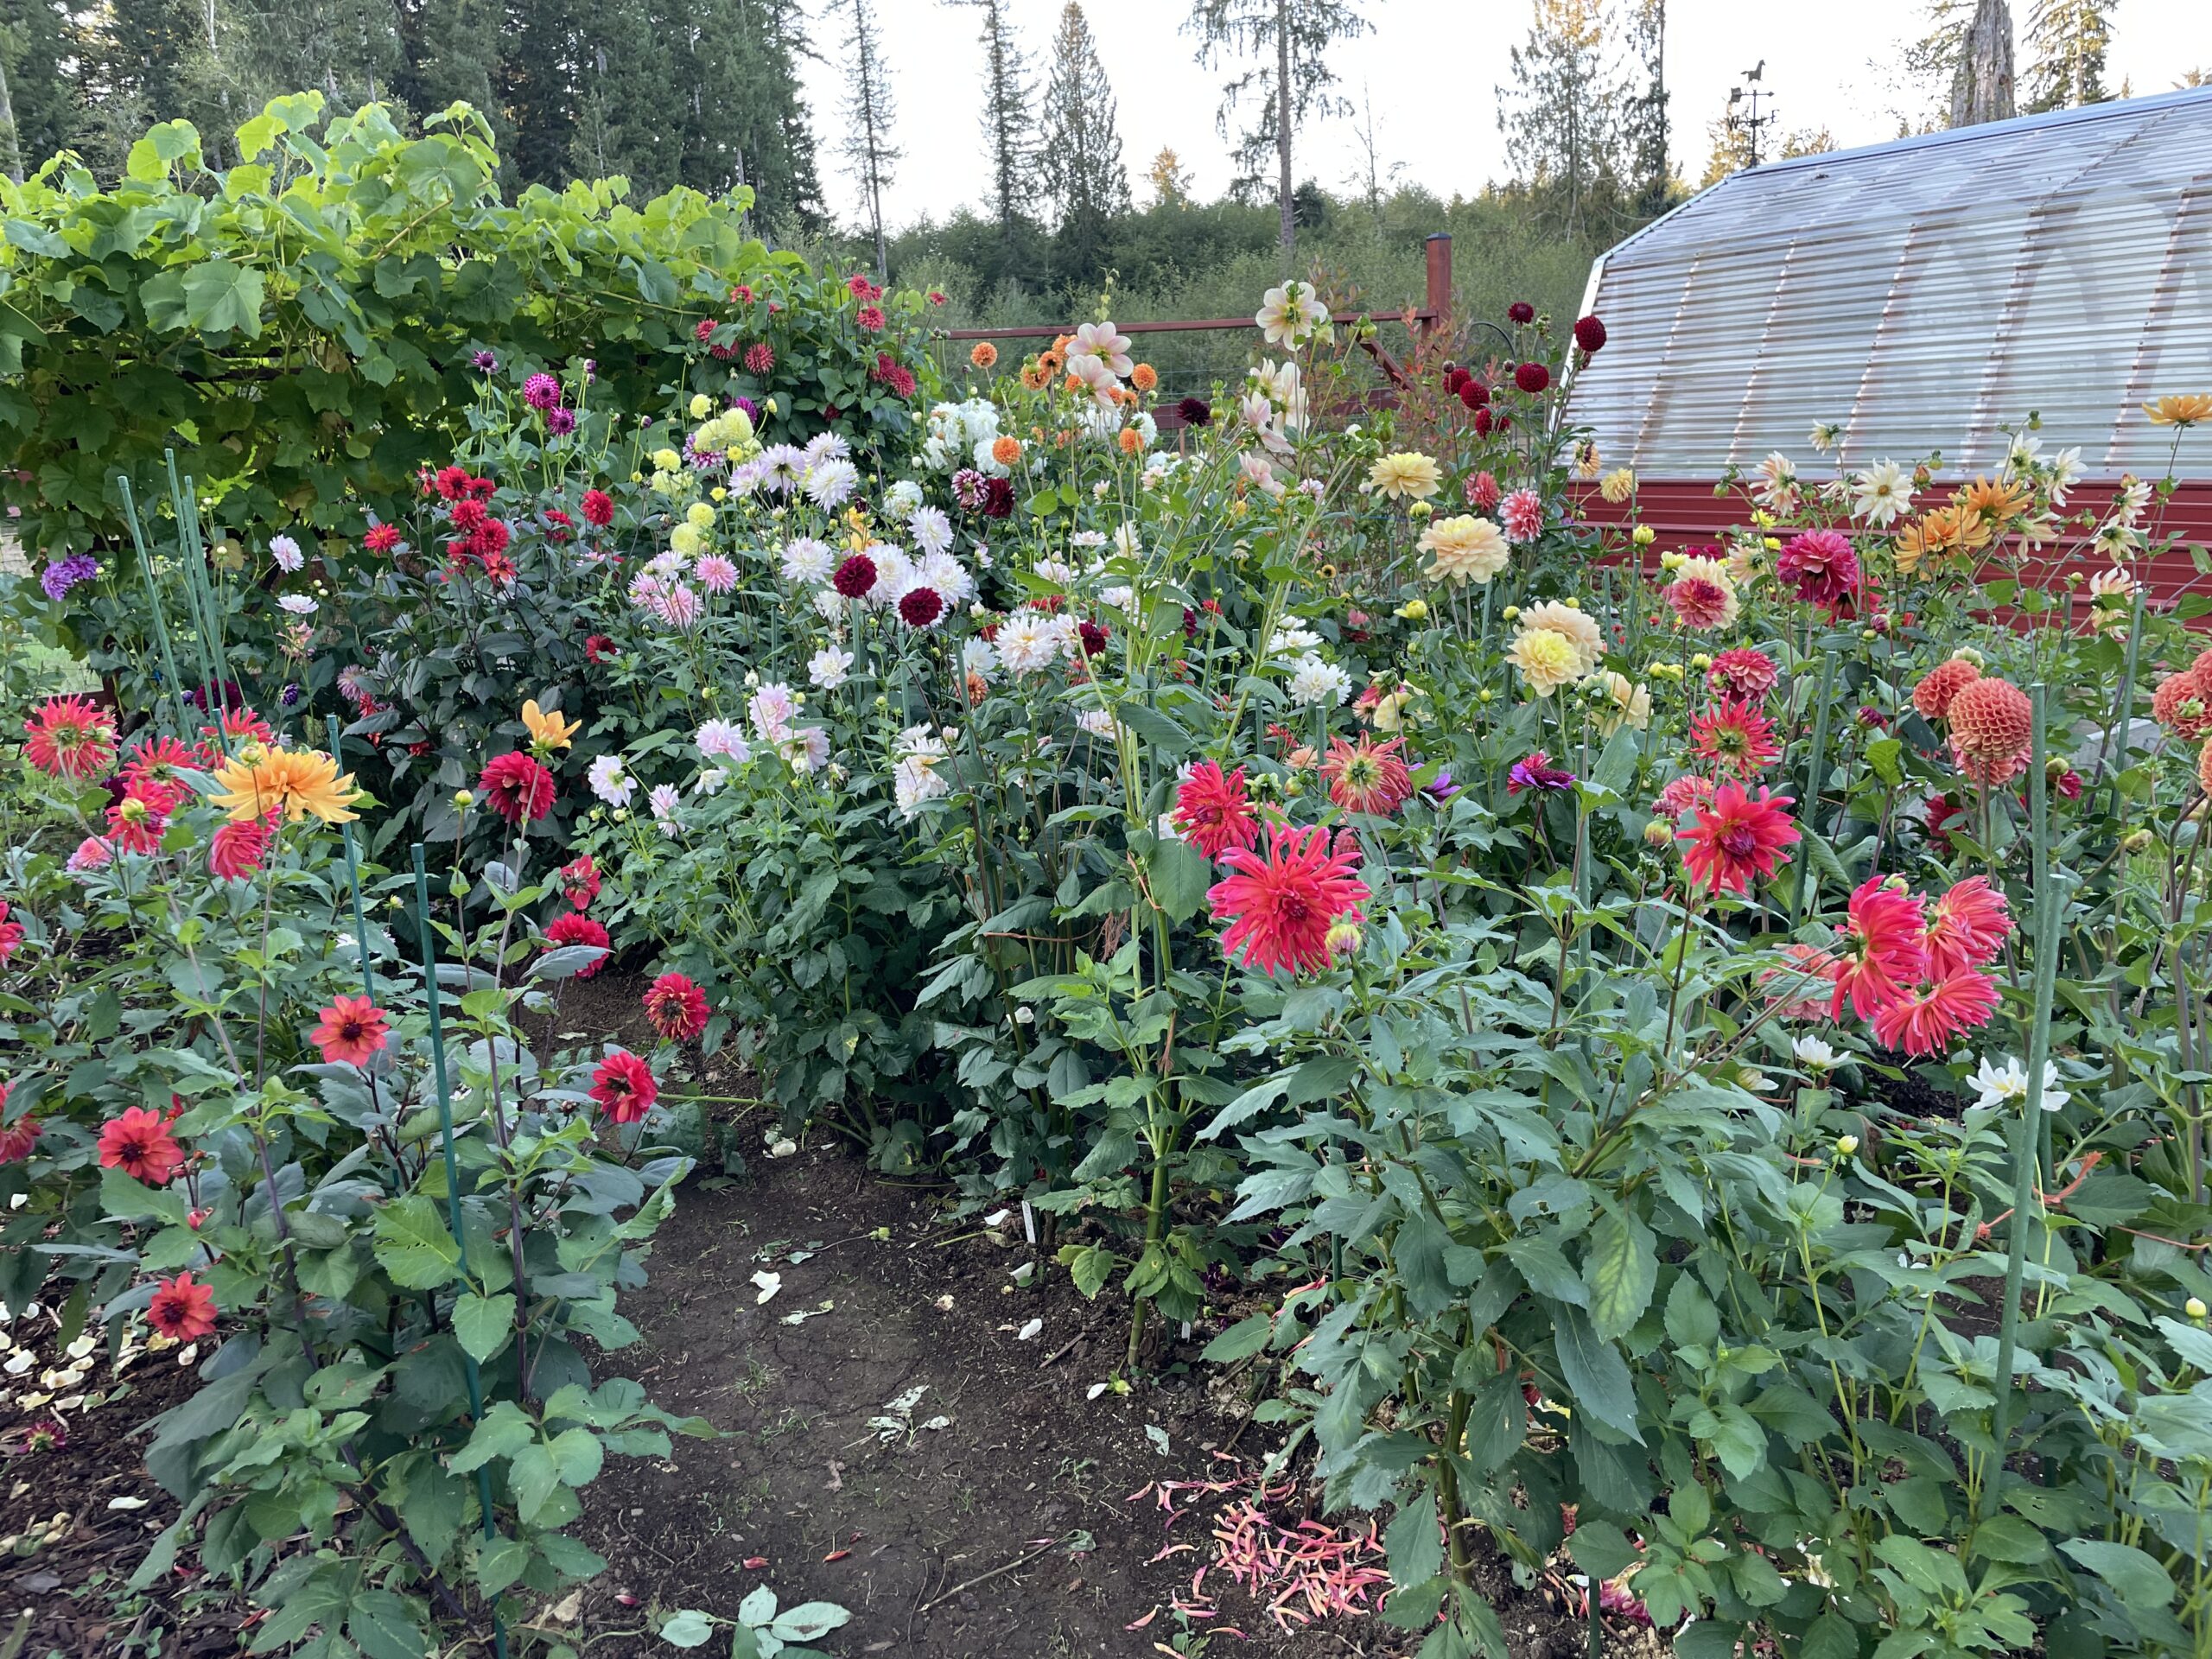 All three dahlia rows of 2022are visible here with the patch in full bloom.